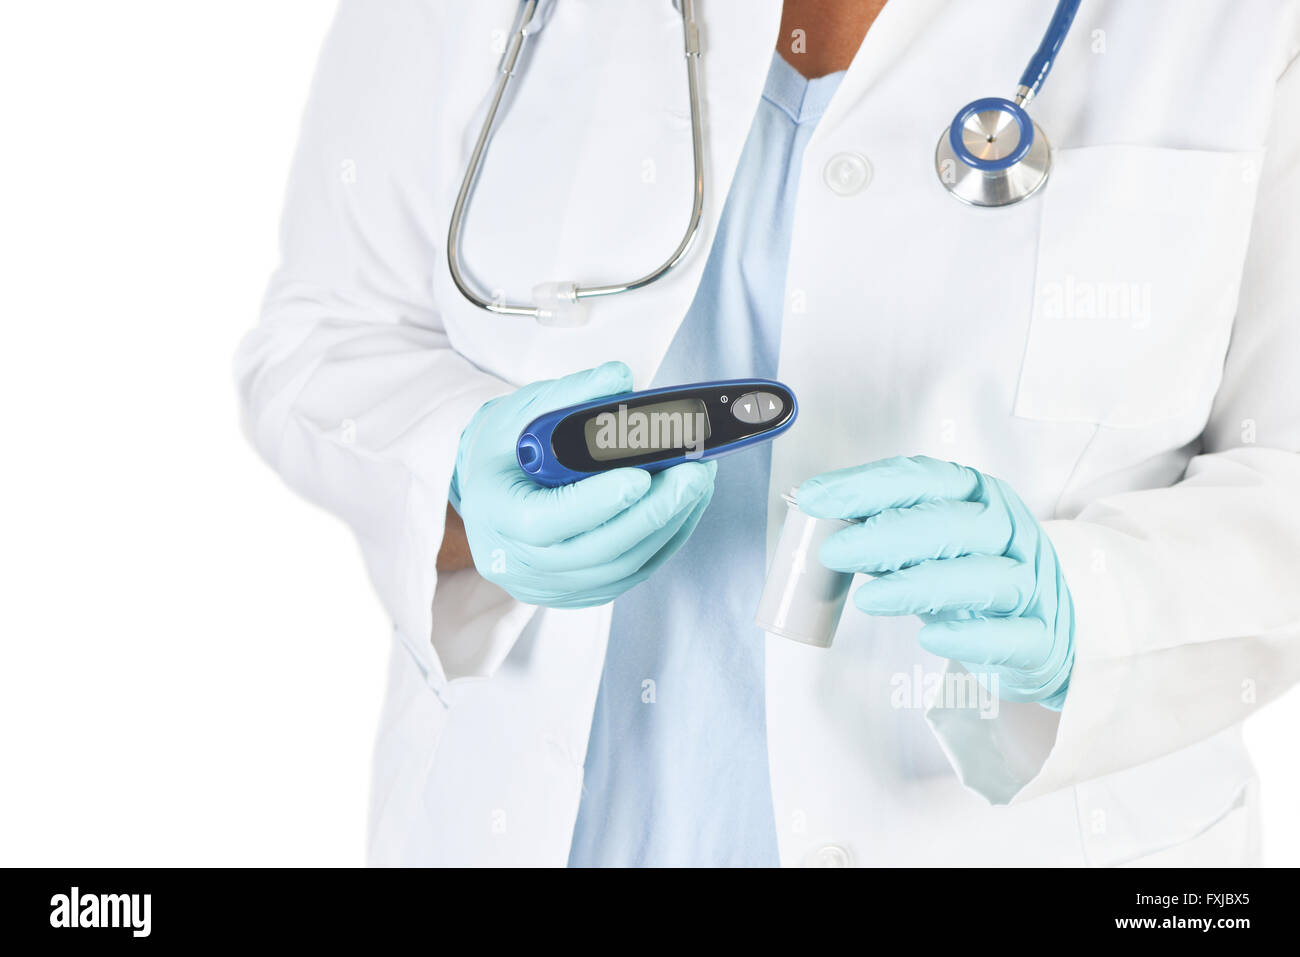 Doctor holds diabetic testing strips and glucometer. Stock Photo